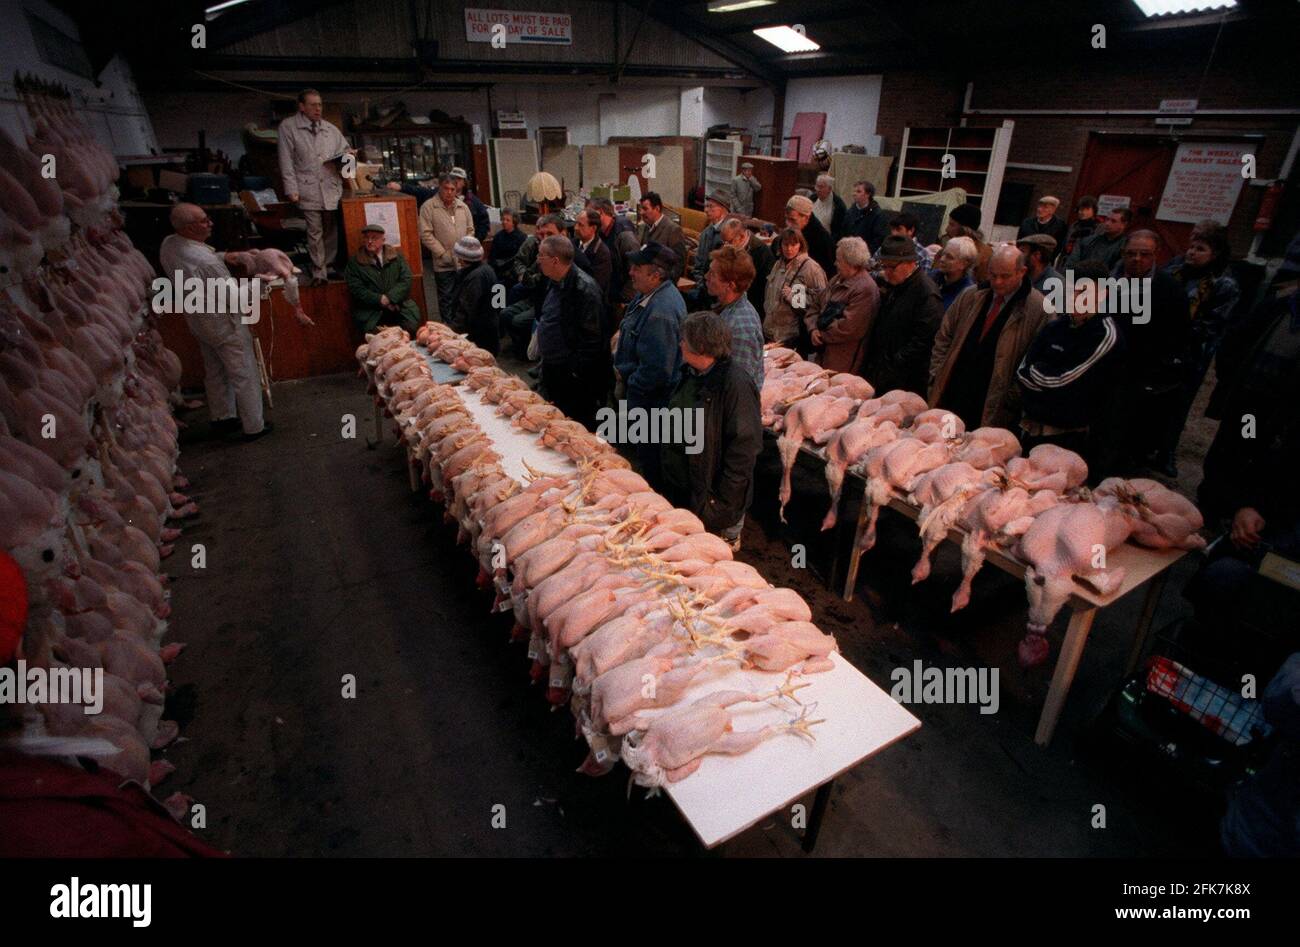 THE ANNUAL SAFFRON WALDEN TURKEY AUCTION WHERE OVER 220 BIRDS WERE SOLD AT AN AVERAGE PRICE OF JUST OVER  ¿1 A POUND WEIGHT. THE AUCTION HAS BEEN HELD SINCE THE 1920S WITH ITS HEY DAY IN THE 1960S WHEN OVER 2000 BIRDS WERE SOLD EVERY CHRISTMAS Stock Photo